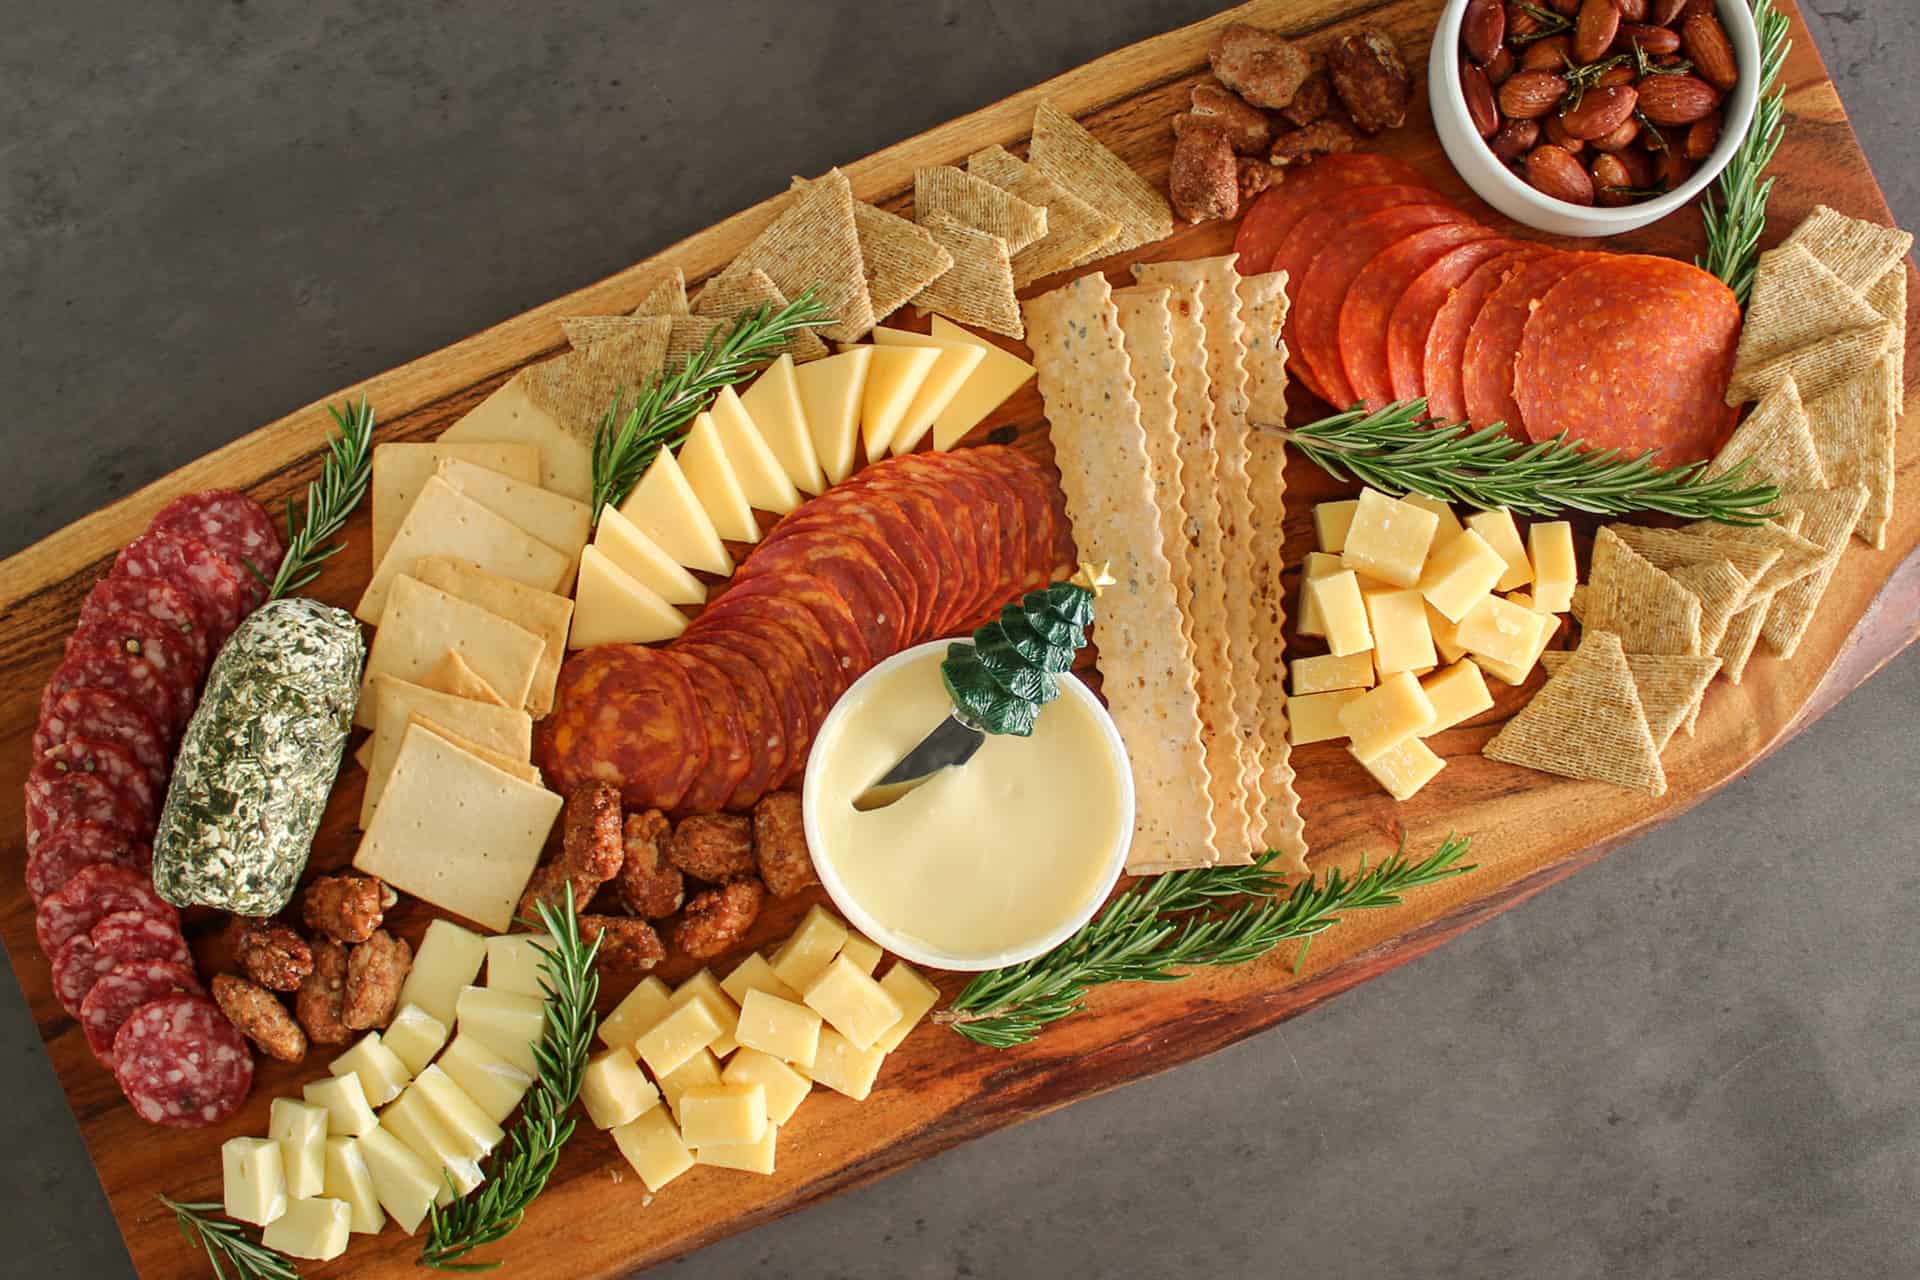 A Christmas charcuterie board with meats, cheeses, crackers, nuts, and fresh rosemary sprigs